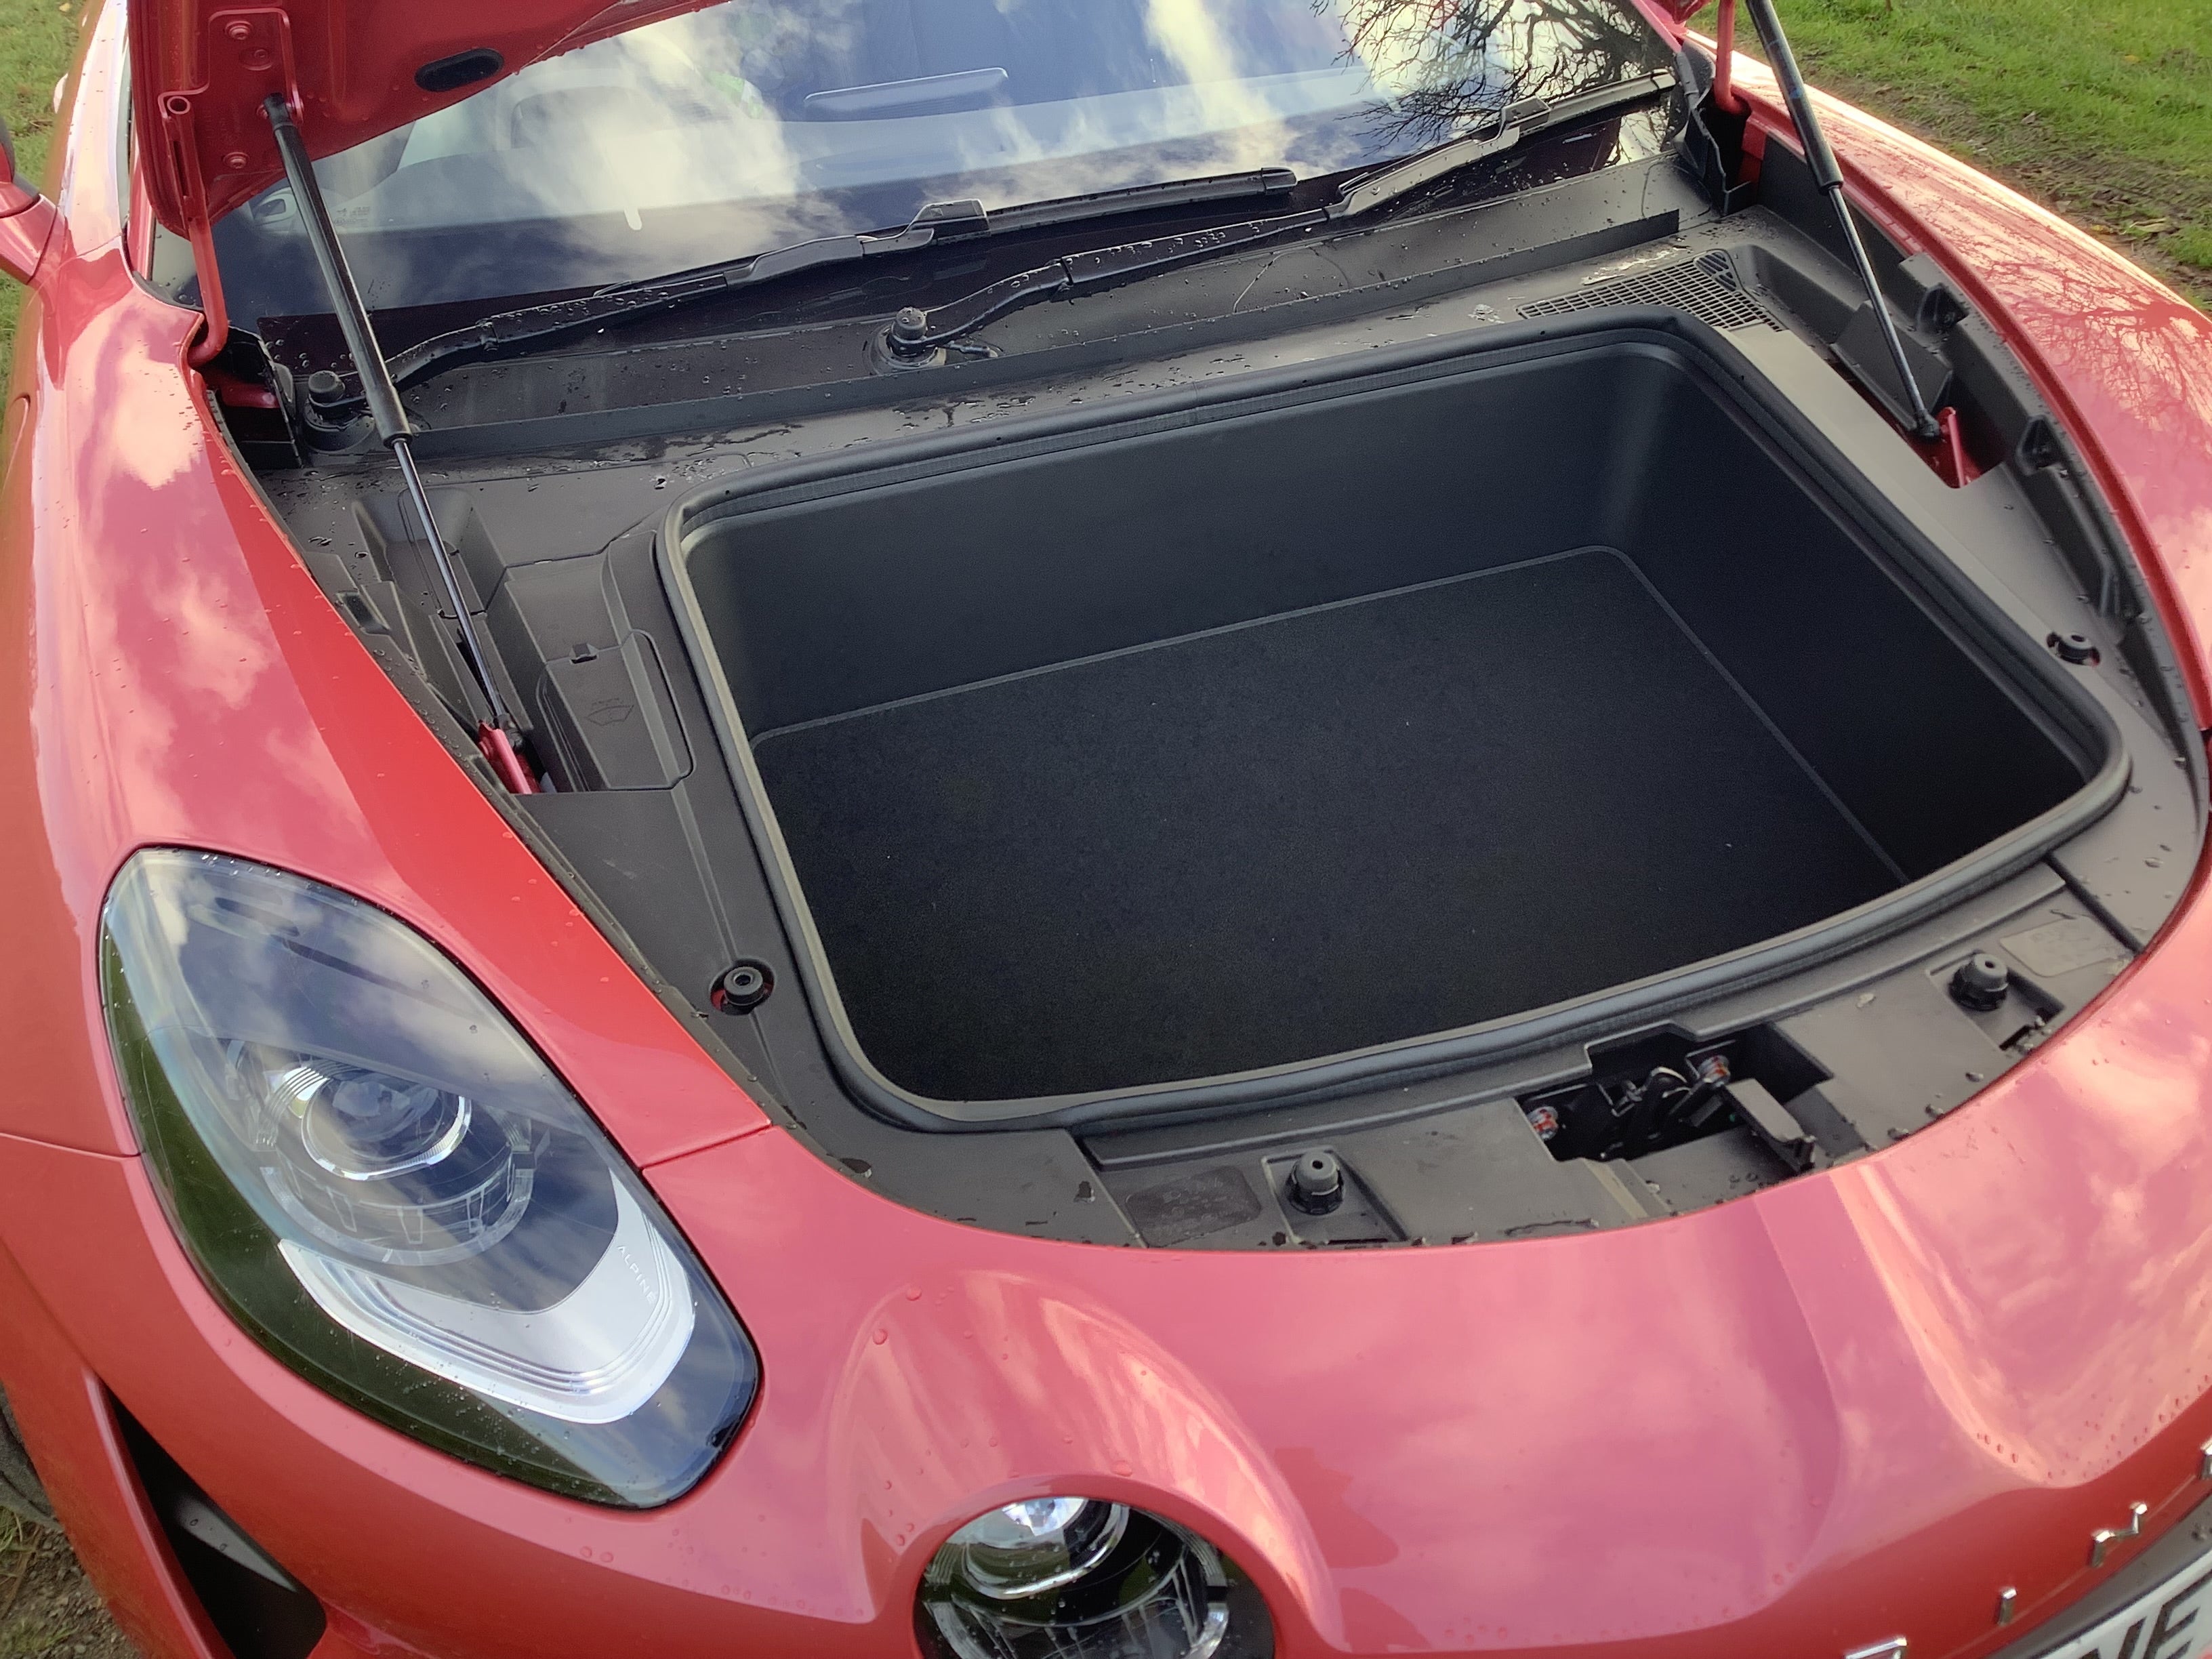 Compartments in the bonnet and behind the engine are sufficient for a couple of overnight bags